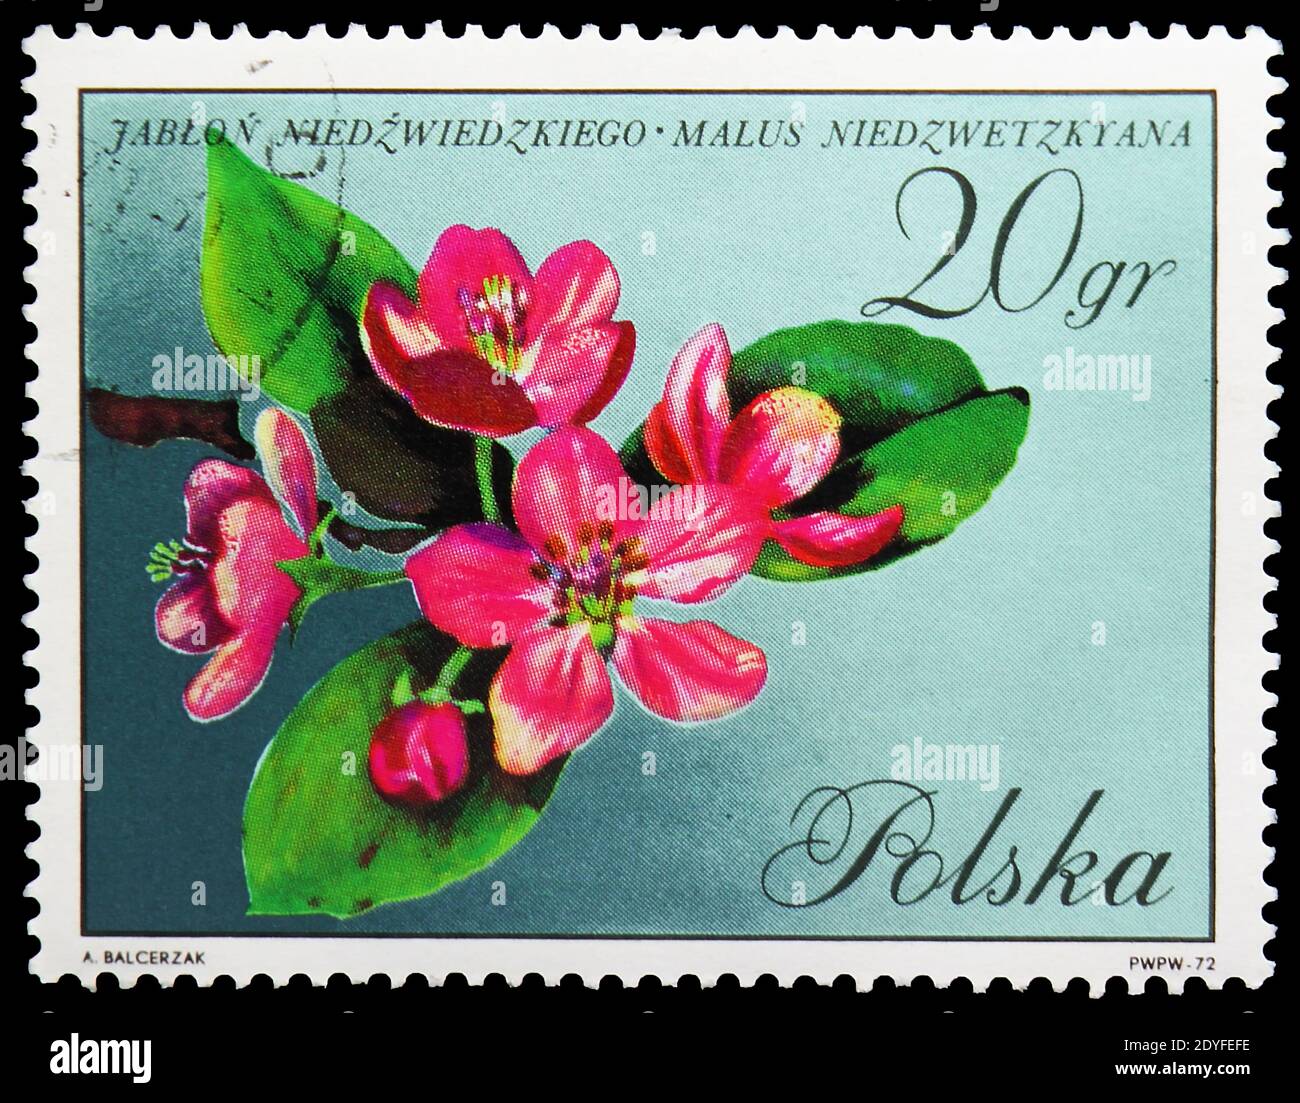 MOSCOW, RUSSIA - MAY 25, 2019: Postage stamp printed in Poland shows Malus niedzwetzkyana, Blossoms In Natural Colors serie, circa 1971 Stock Photo